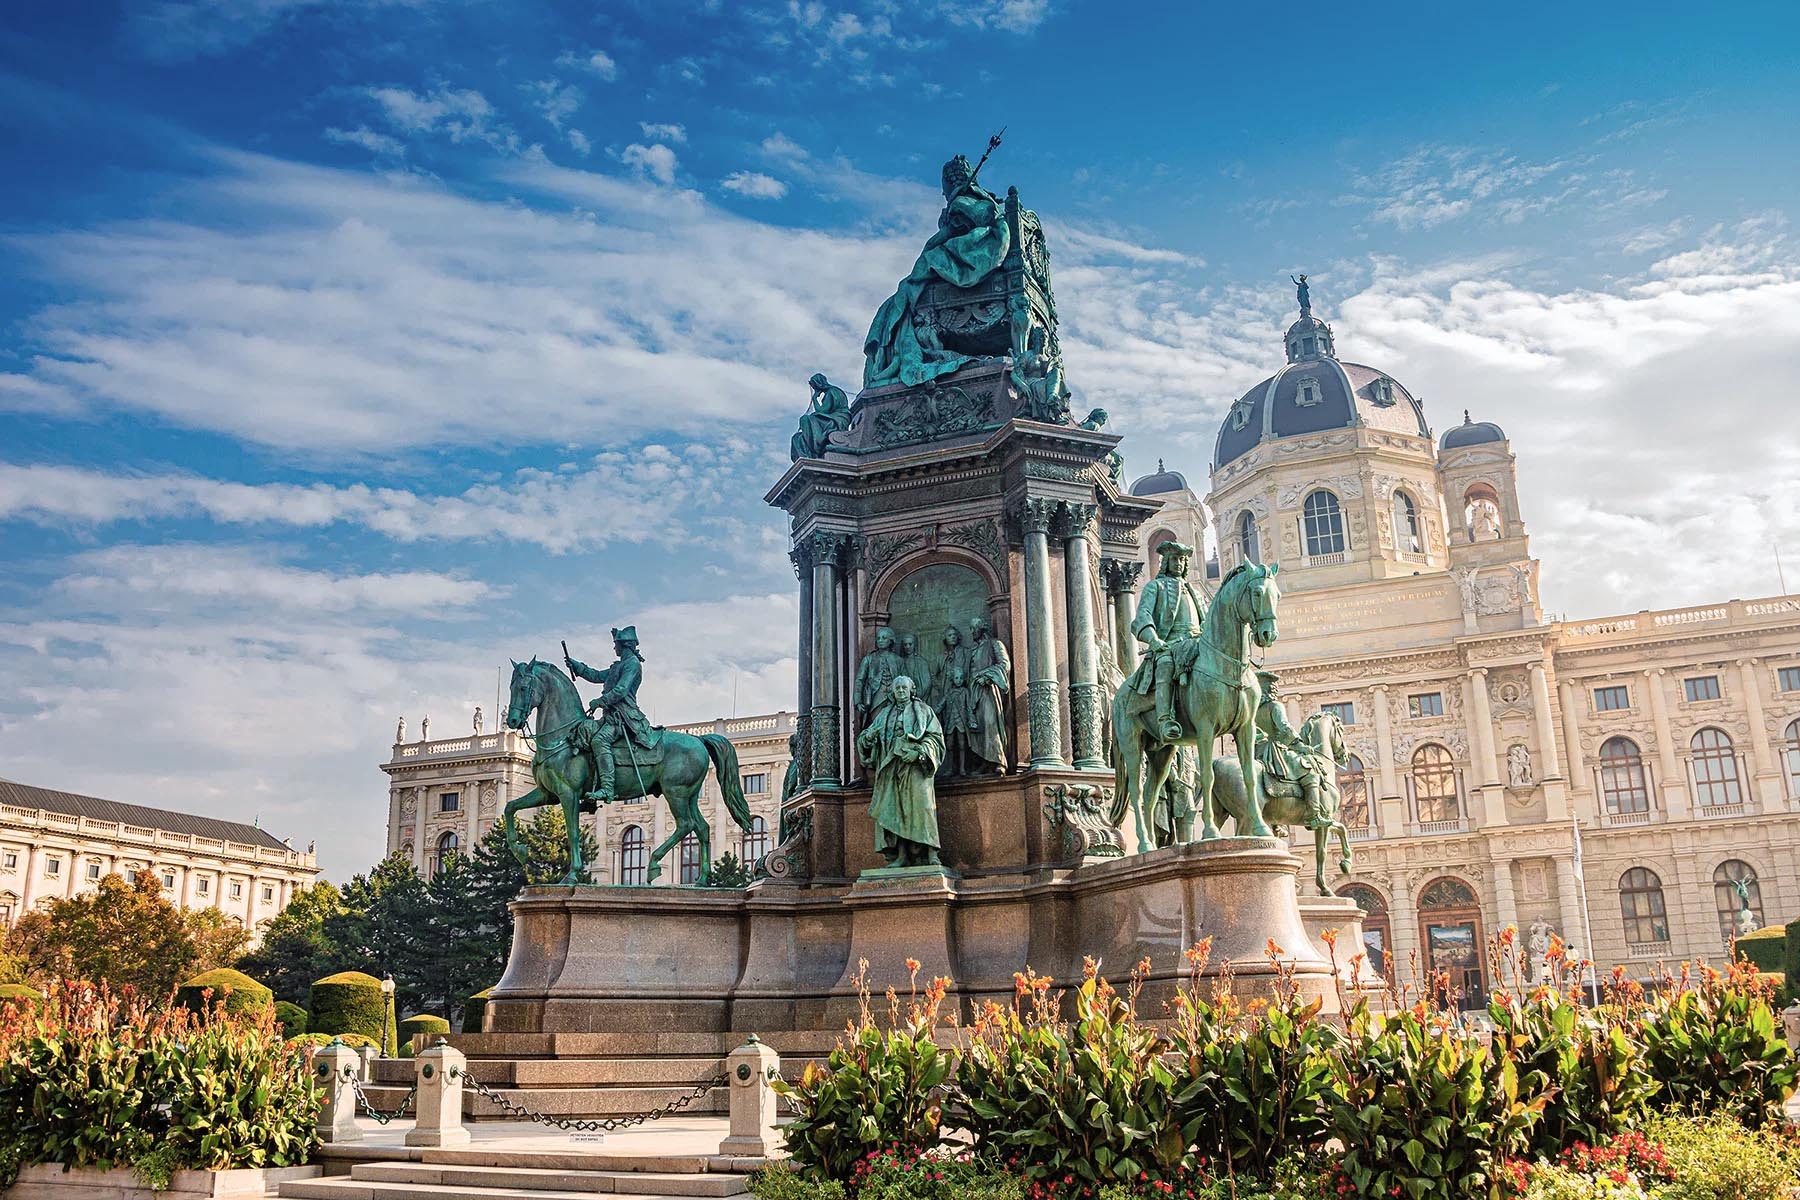 A monument honoring Maria Theresa in Vienna